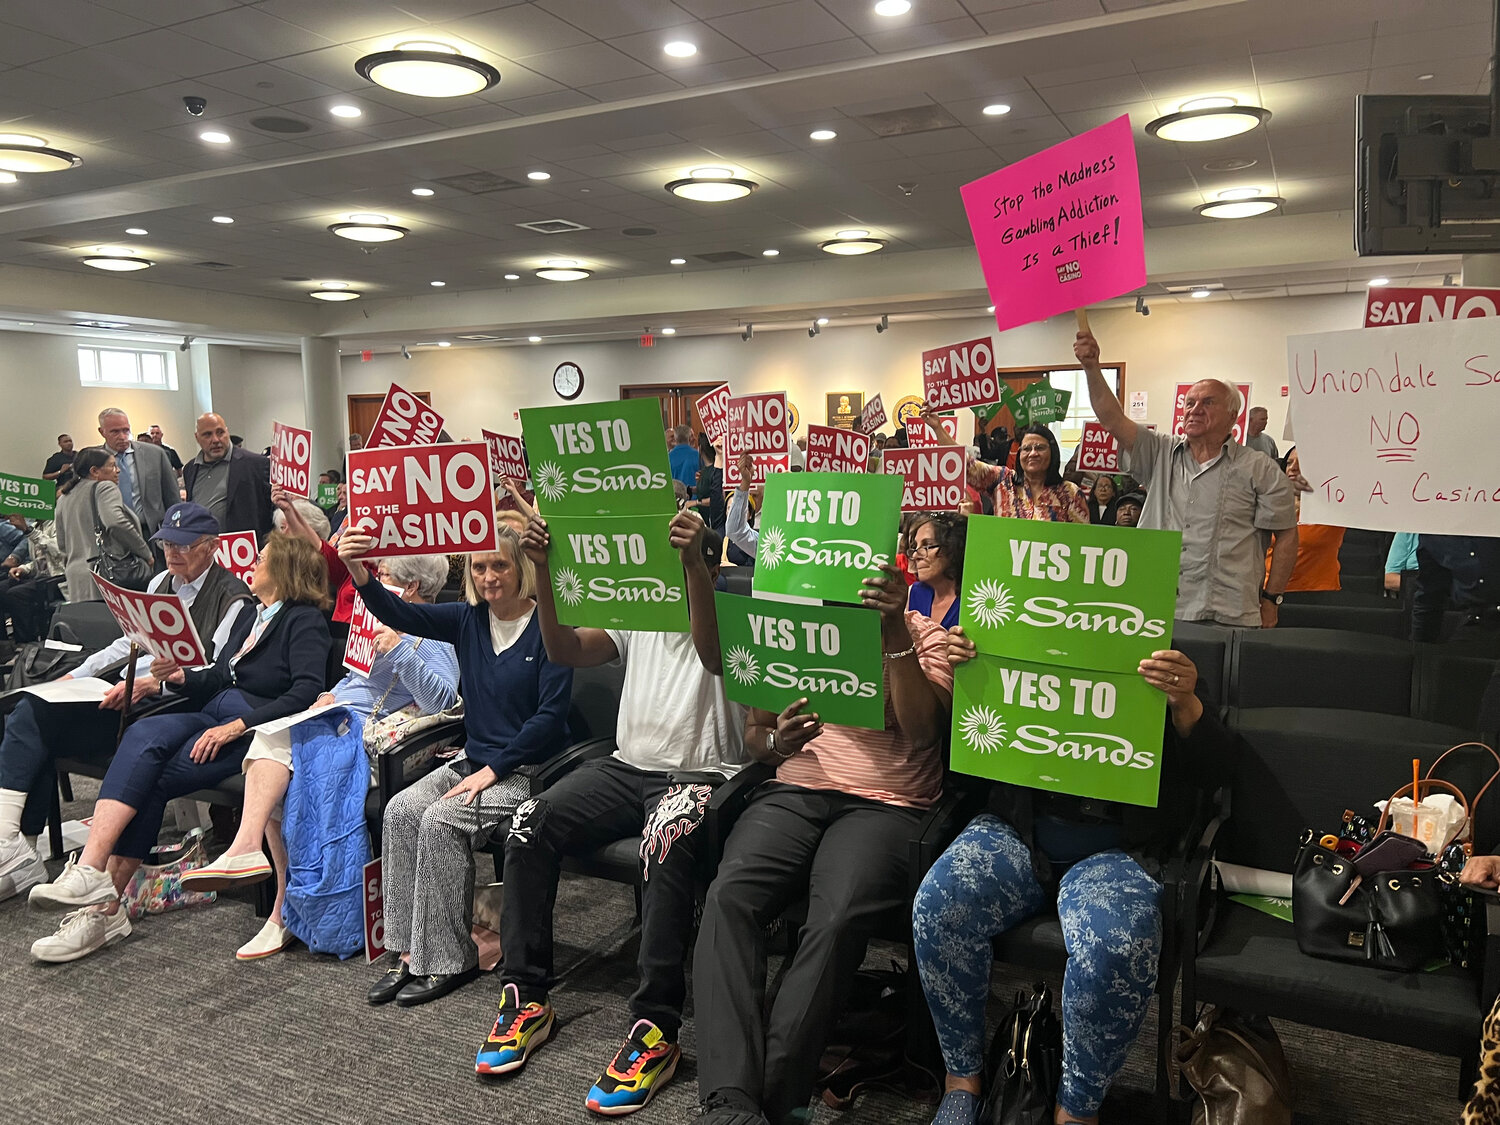 Community members from both sides of the aisle showed their stance on the Las Vegas Sands at the County Legislature on May 22.